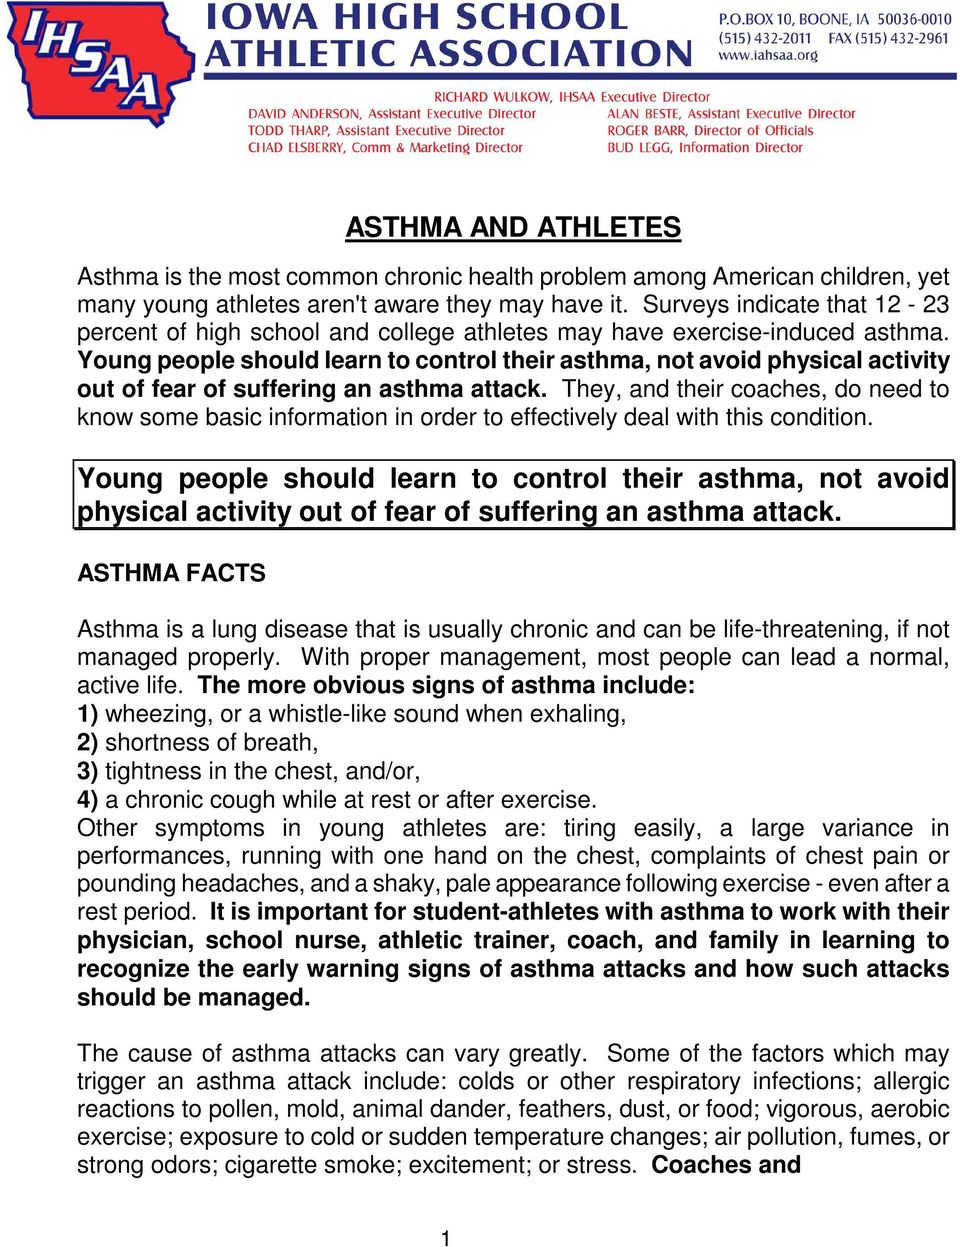 Young people should learn to control their asthma, not avoid physical activity out of fear of suffering an asthma attack.